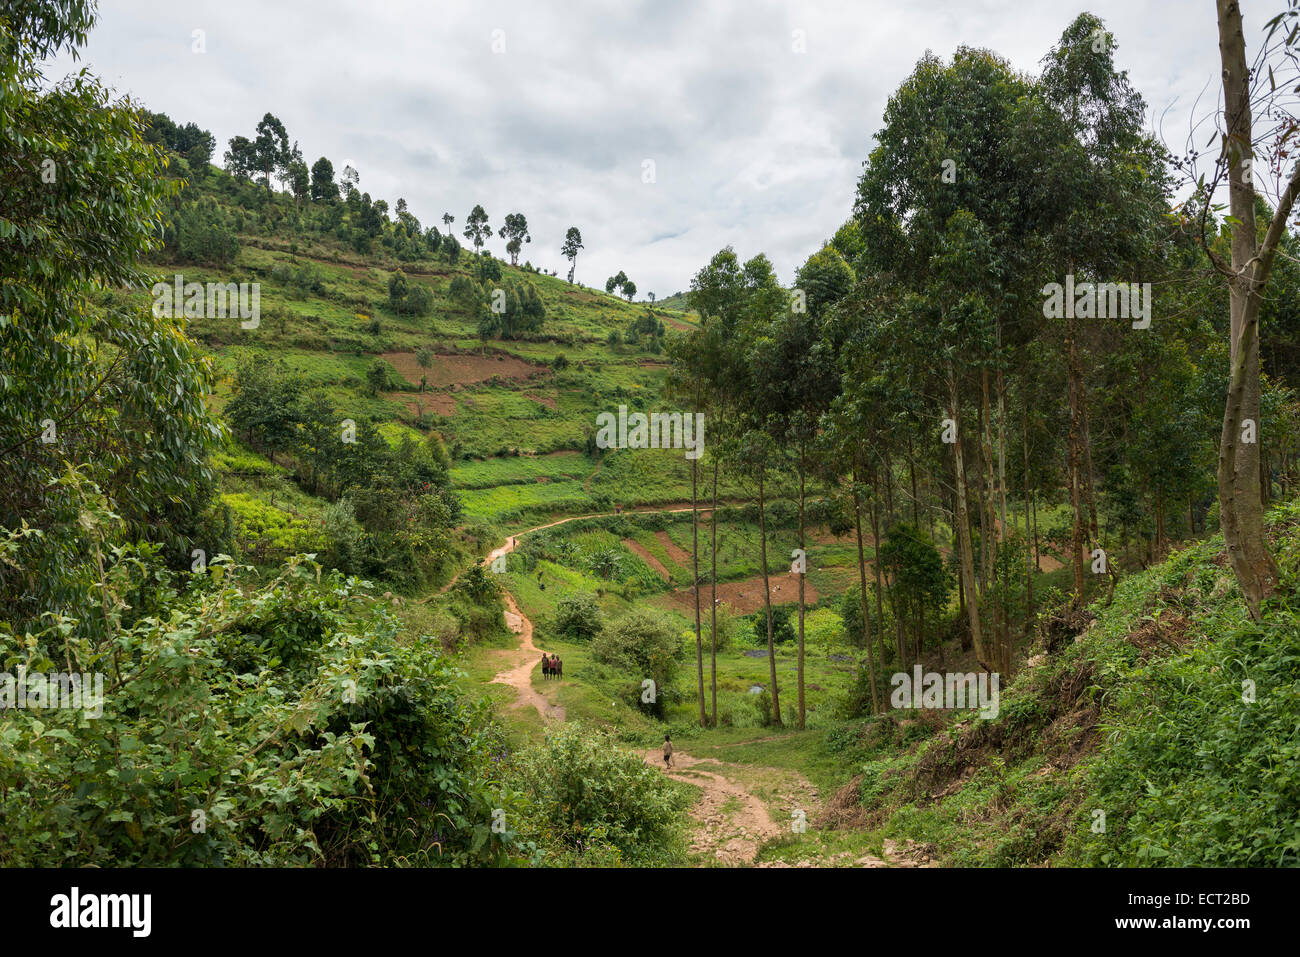 Path through cultivated fields on a slope, Uganda Stock Photo